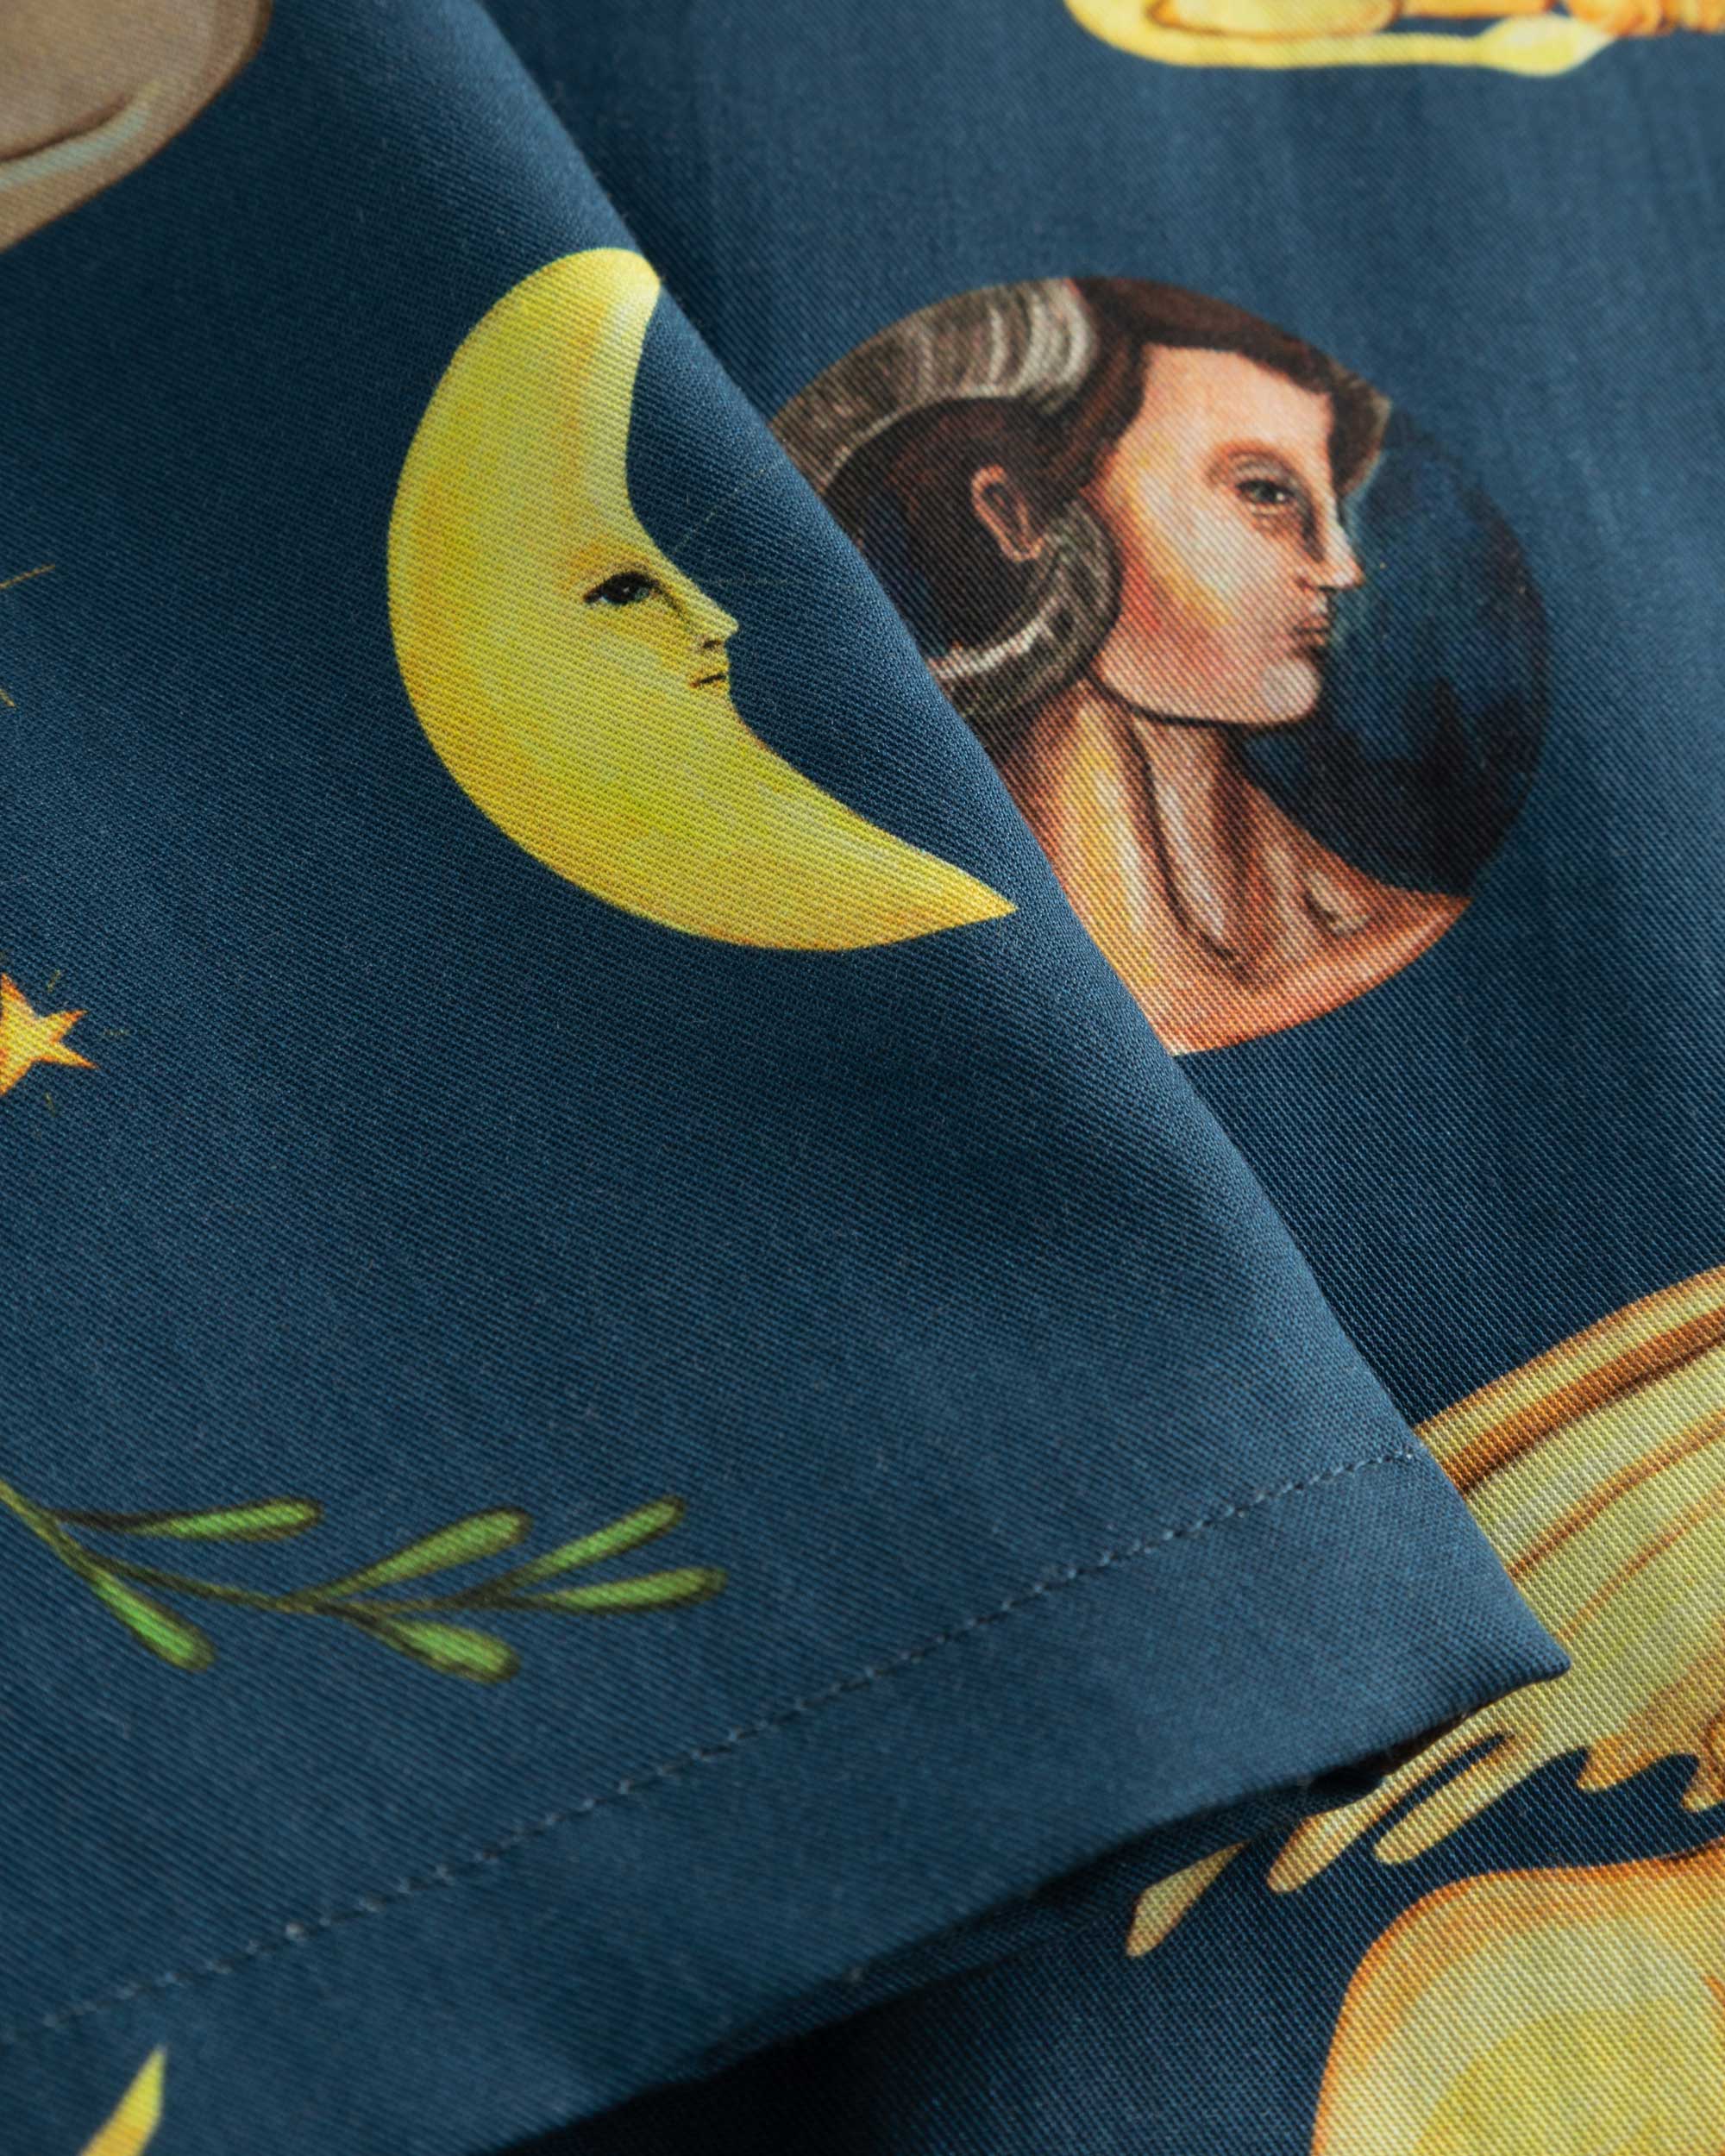 Close-up of stitchings and multi-colored graphic pattern on a navy vacation shirt.